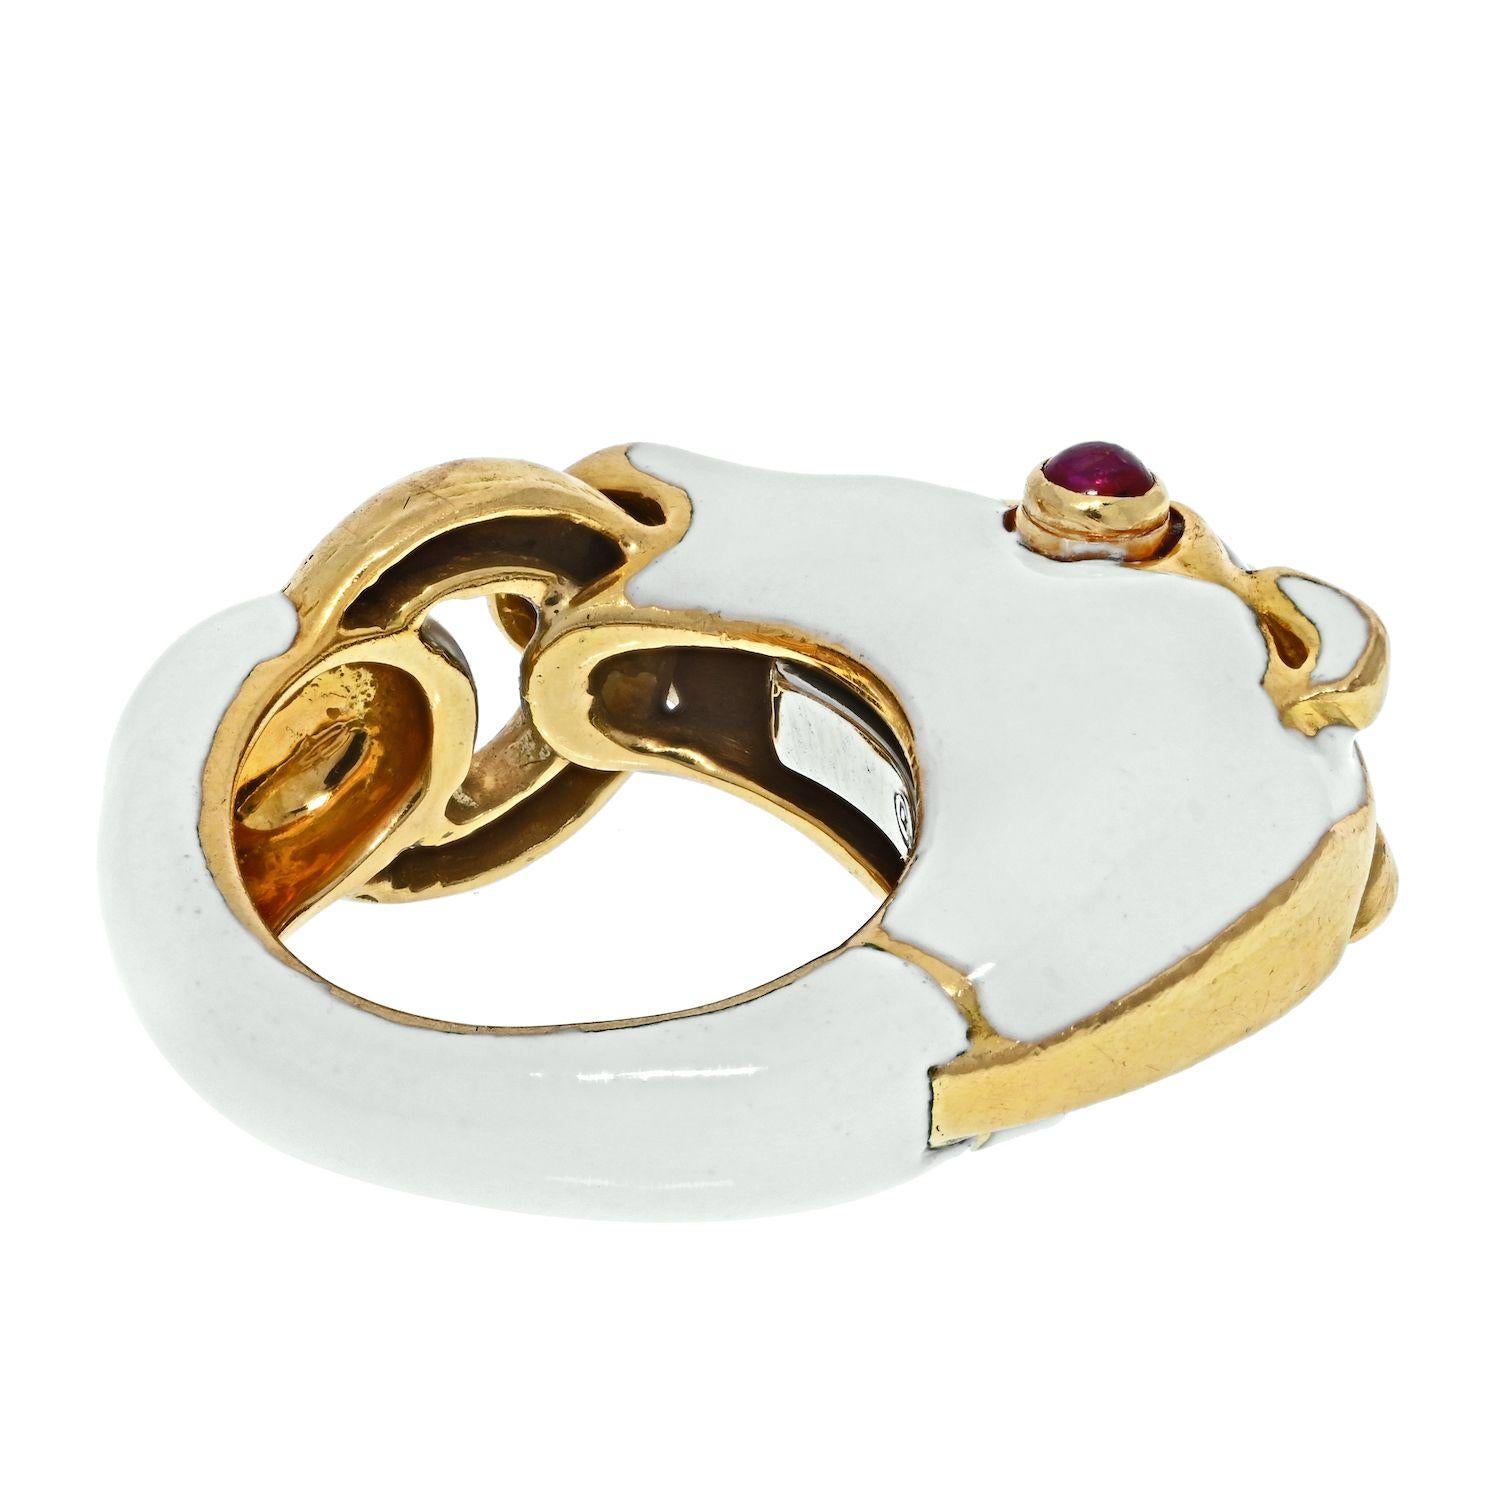 Ring designed as stylized horse head with a polished gold bit ring in mouth. With intact high gloss, opaque, white enamel body. Accented by round cabochon ruby eyes weighing approximately 0.25 carat. Transparent with medium slightly pinkish and